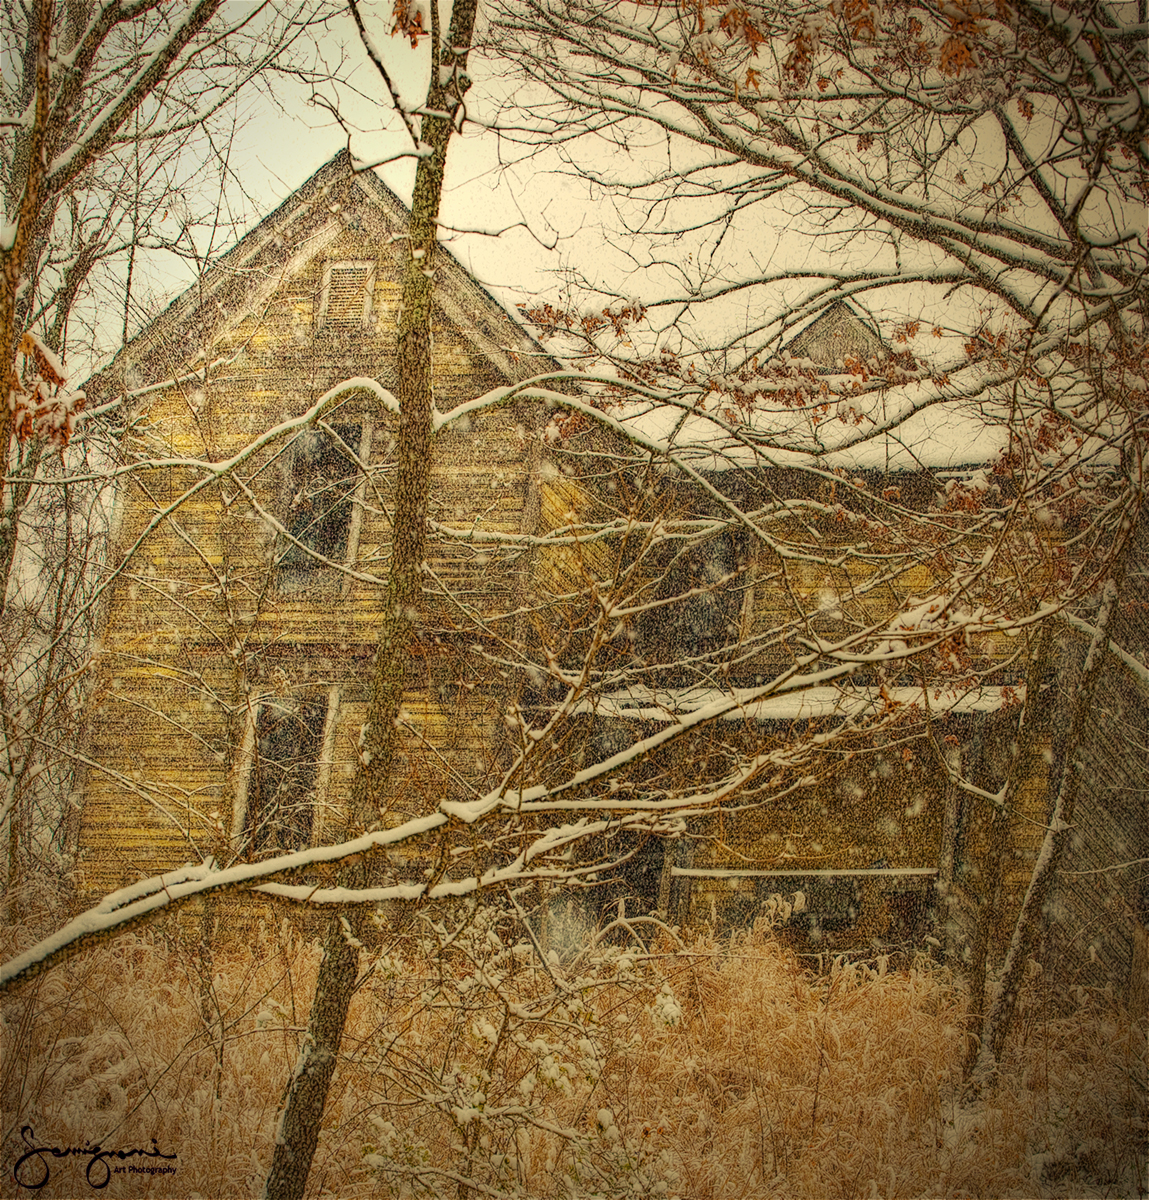 Haunted House in Snow